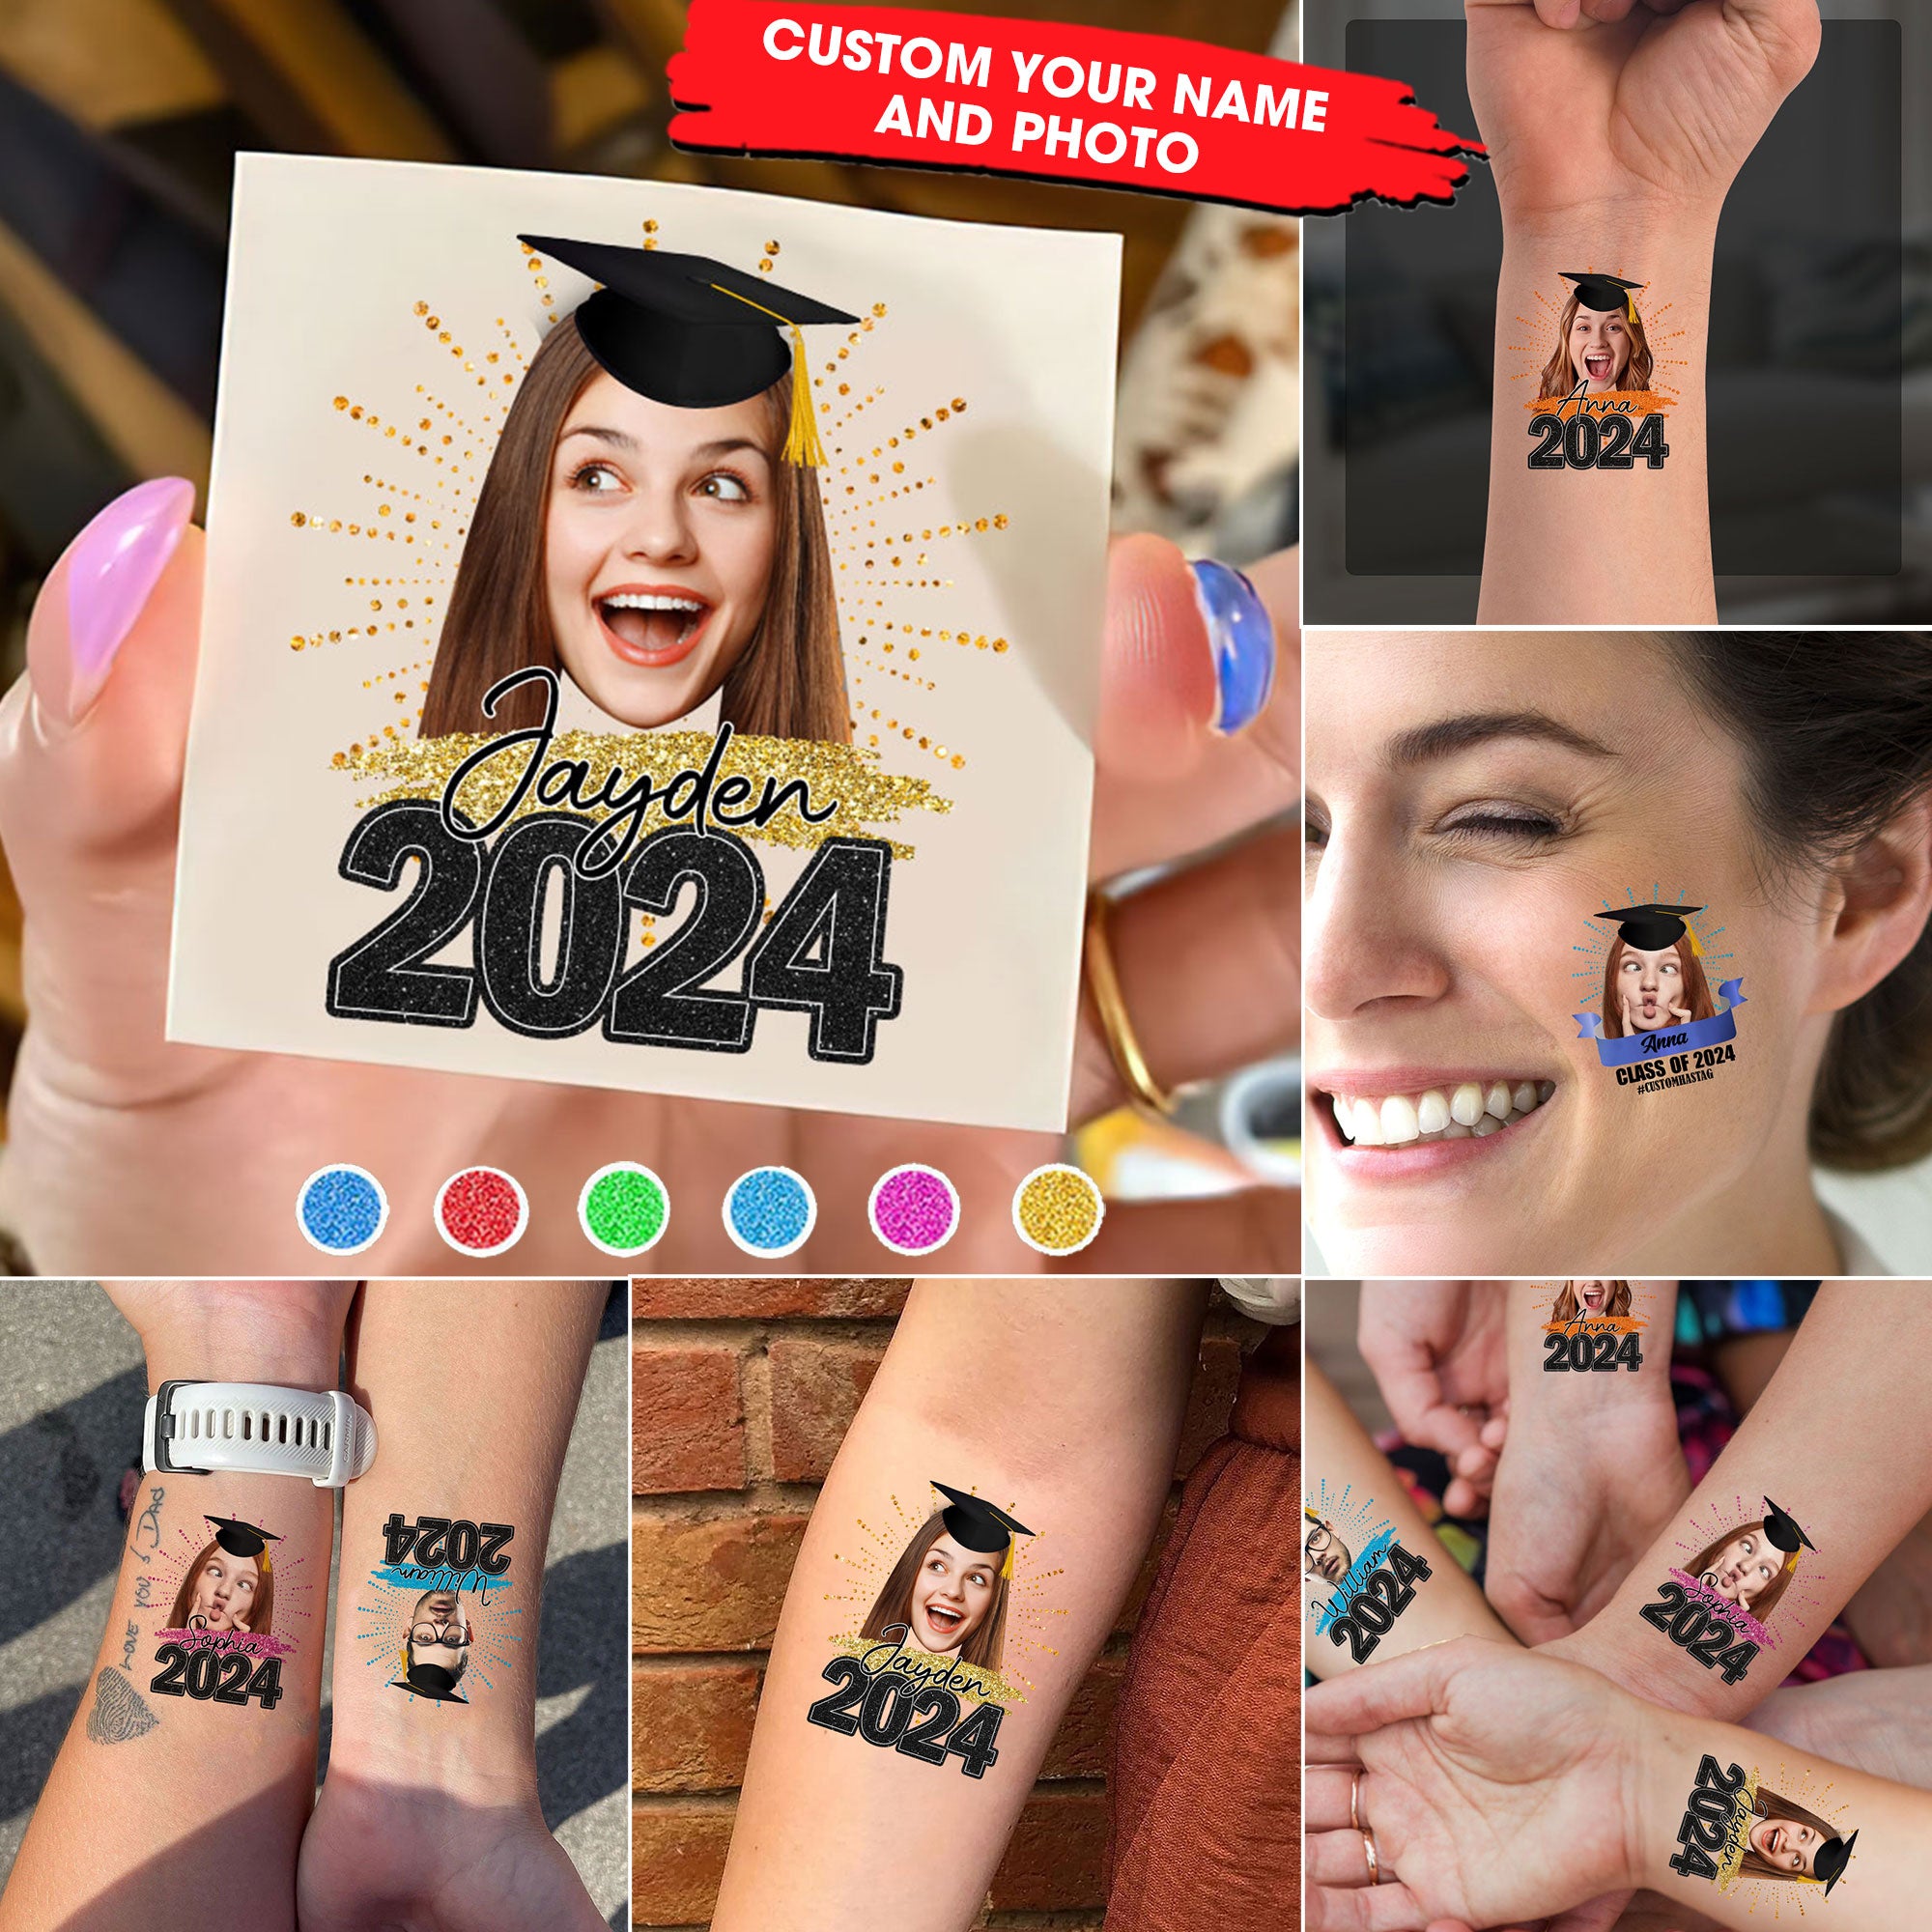 Congrats 2024, Custom Color,  Your Photo And Name Temporary Tattoo, Personalized Photo And Name, Fake Tattoo, Graduation Gift